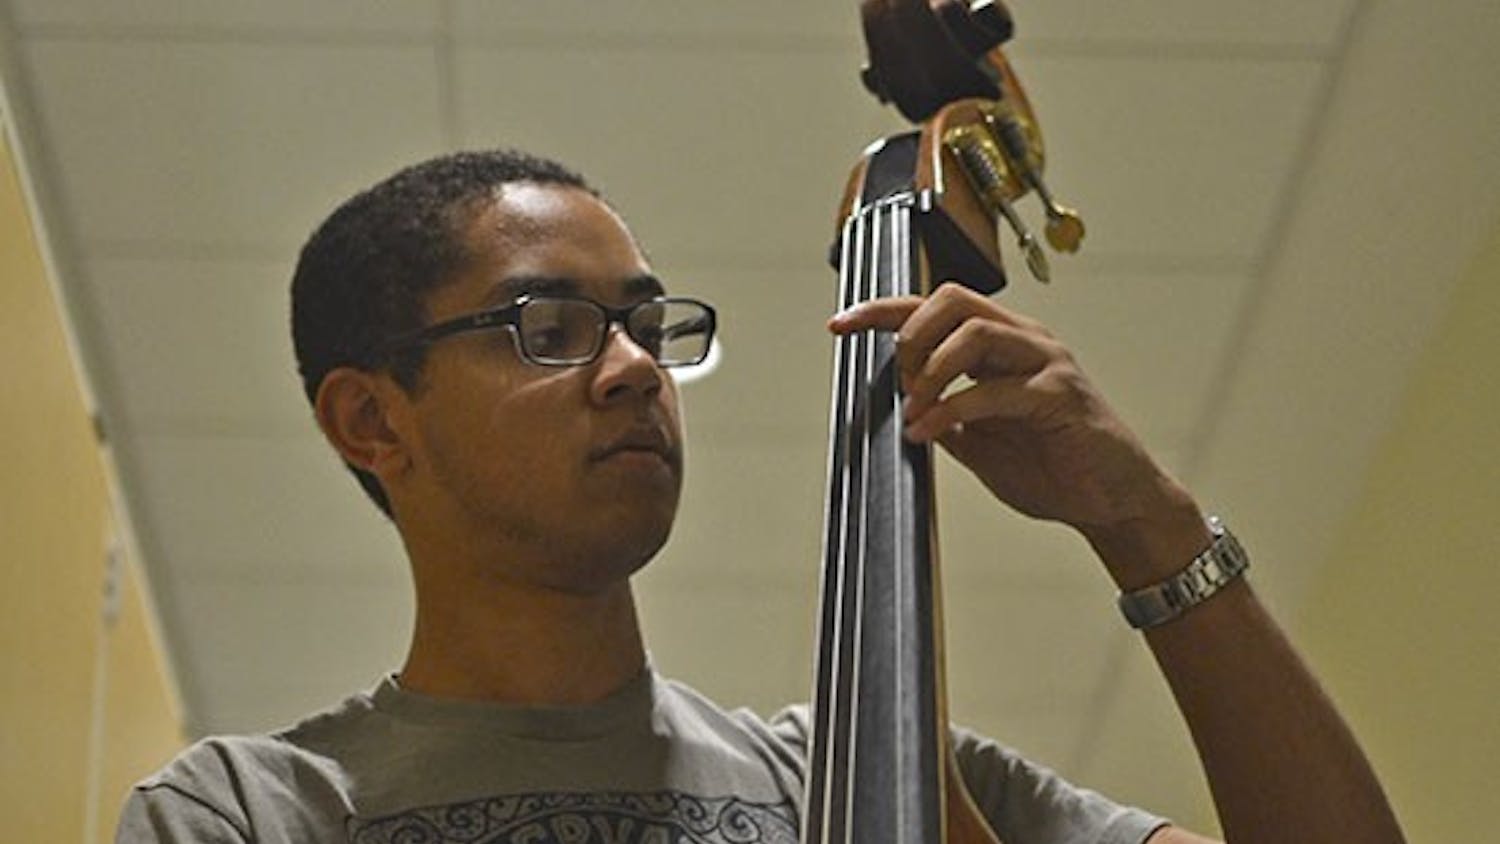 Freshman music major Andrew McClenney deftly fiddles the stand-up bass at Kenan Music Hall on Monday, September 26th, 2016. 